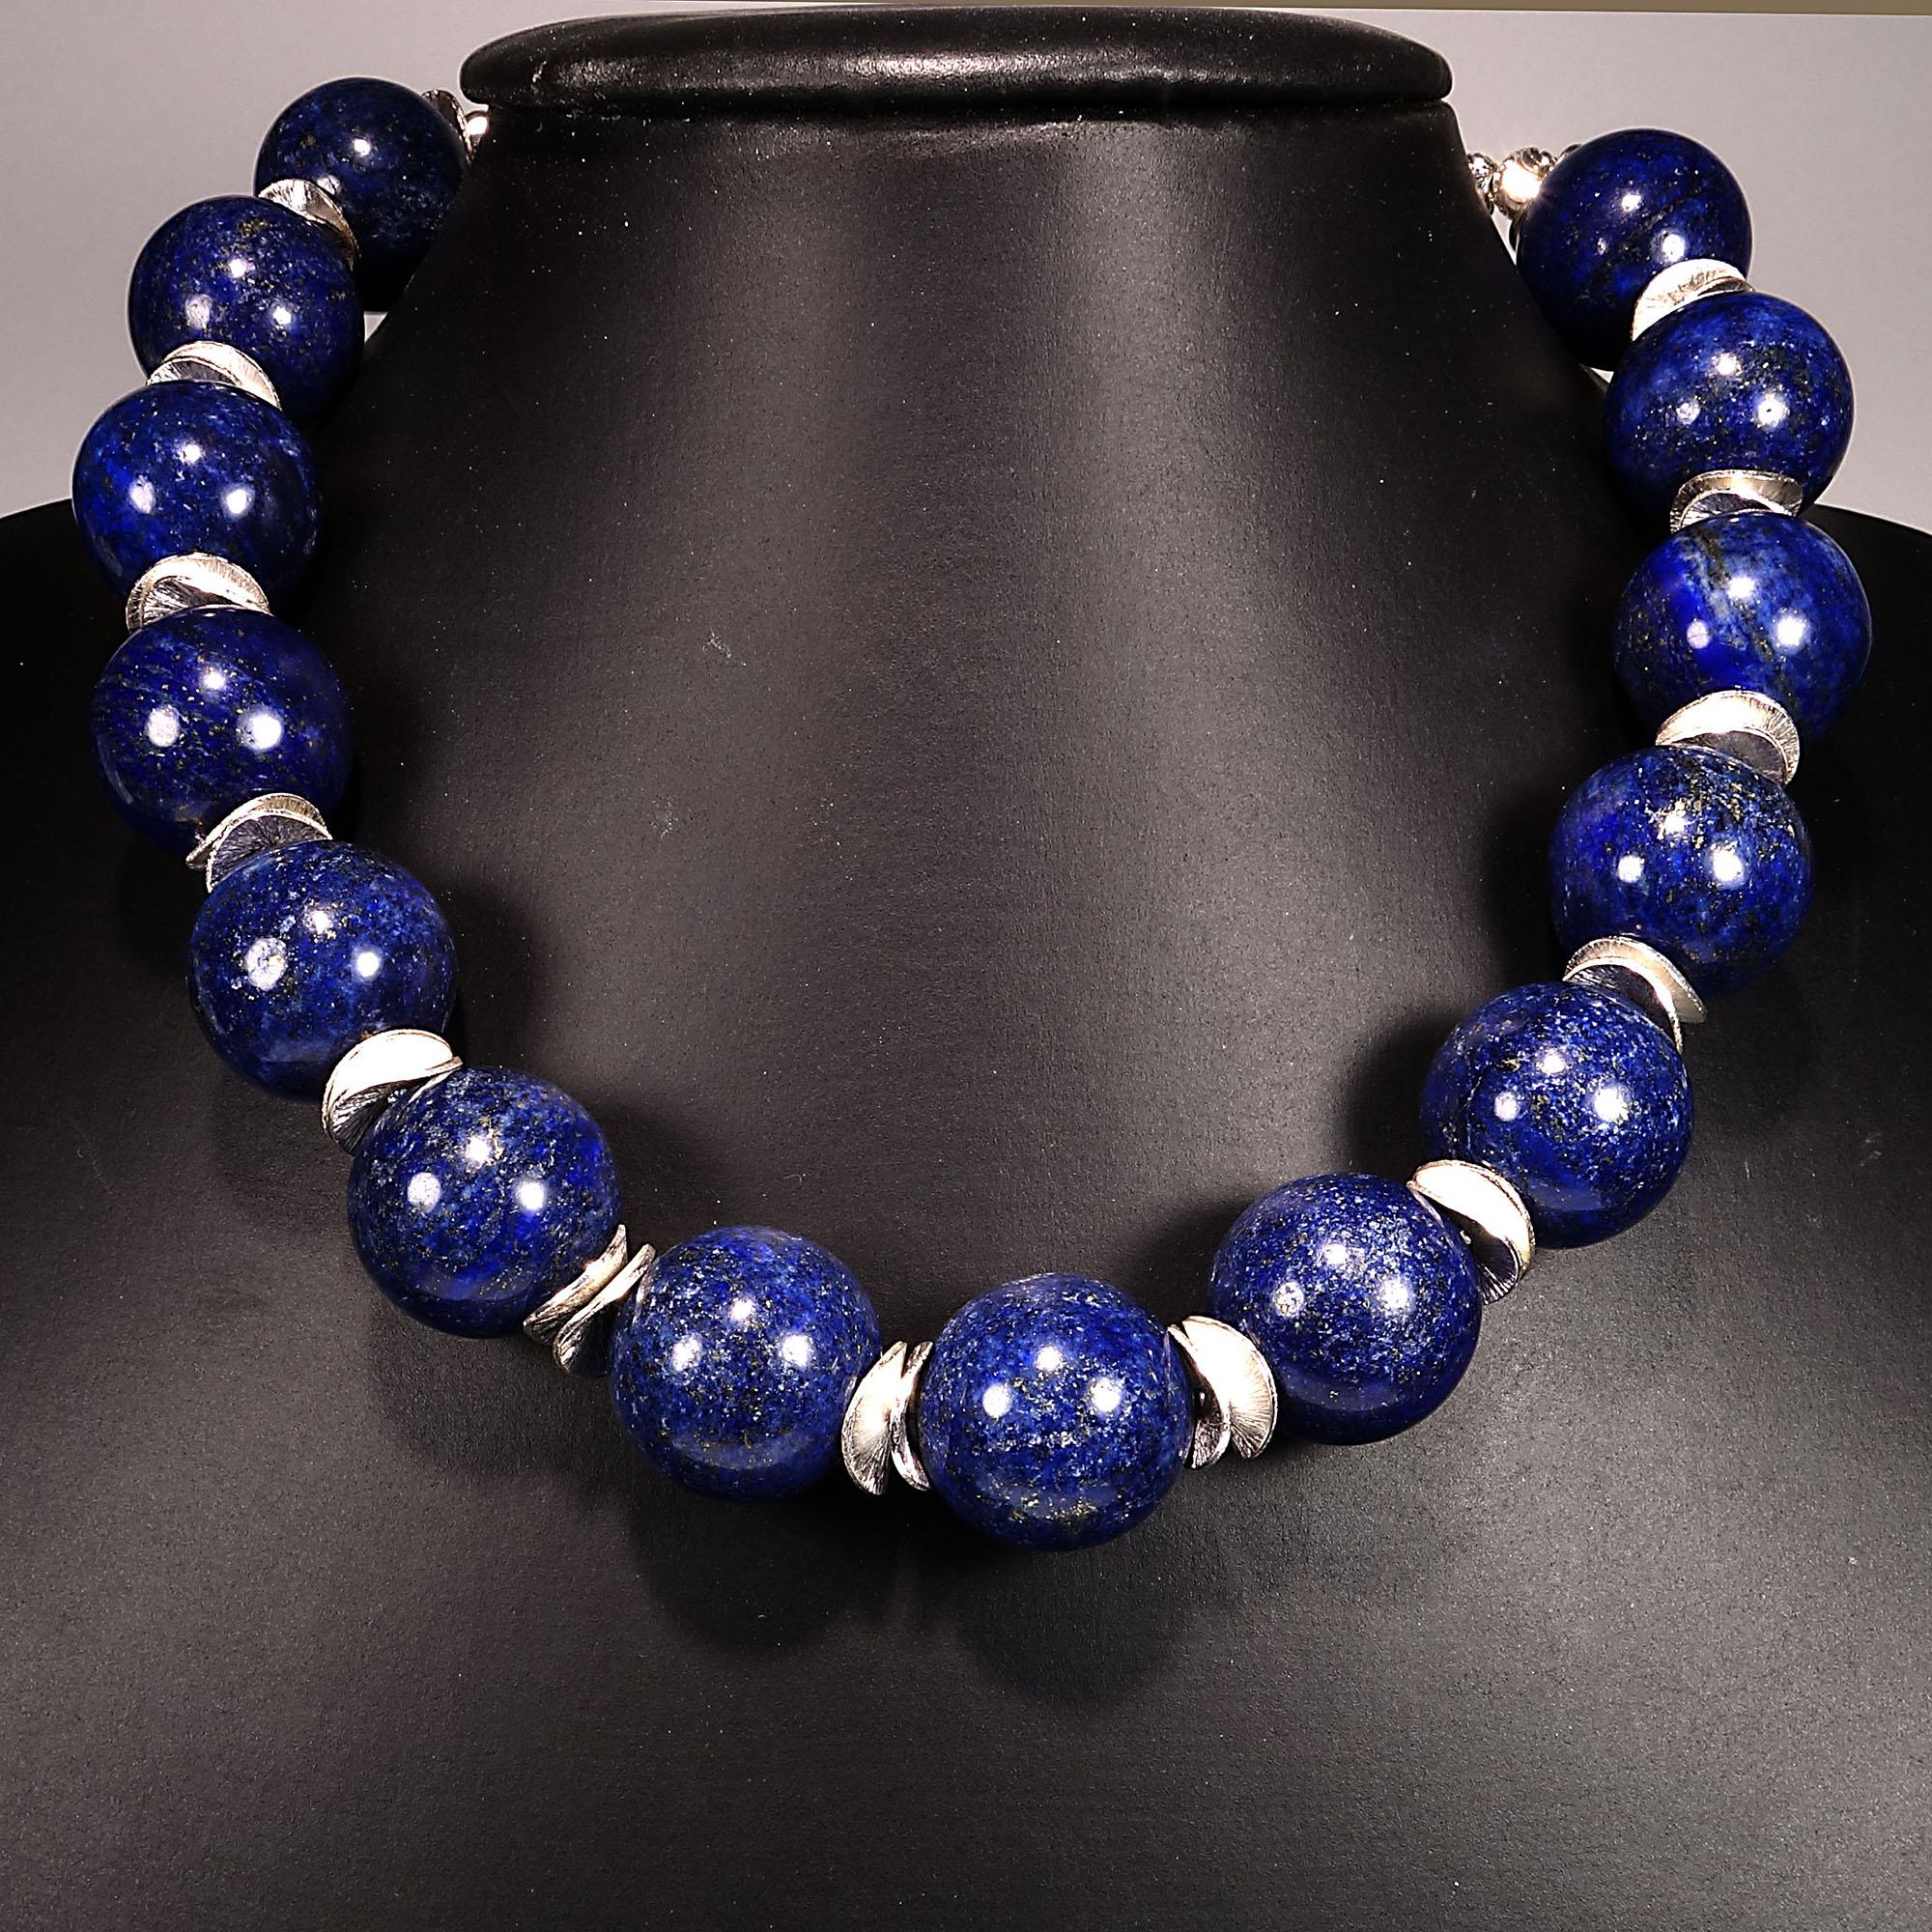 Statement choker necklace of 18MM highly polished blue Lapis Lazuli with brushed silver tone flutter accents.  This 15.5 inch choker is secured with a gorgeous Baroque Pearl set in Sterling Silver clasp. This Baroque Pearl can easily be used as a